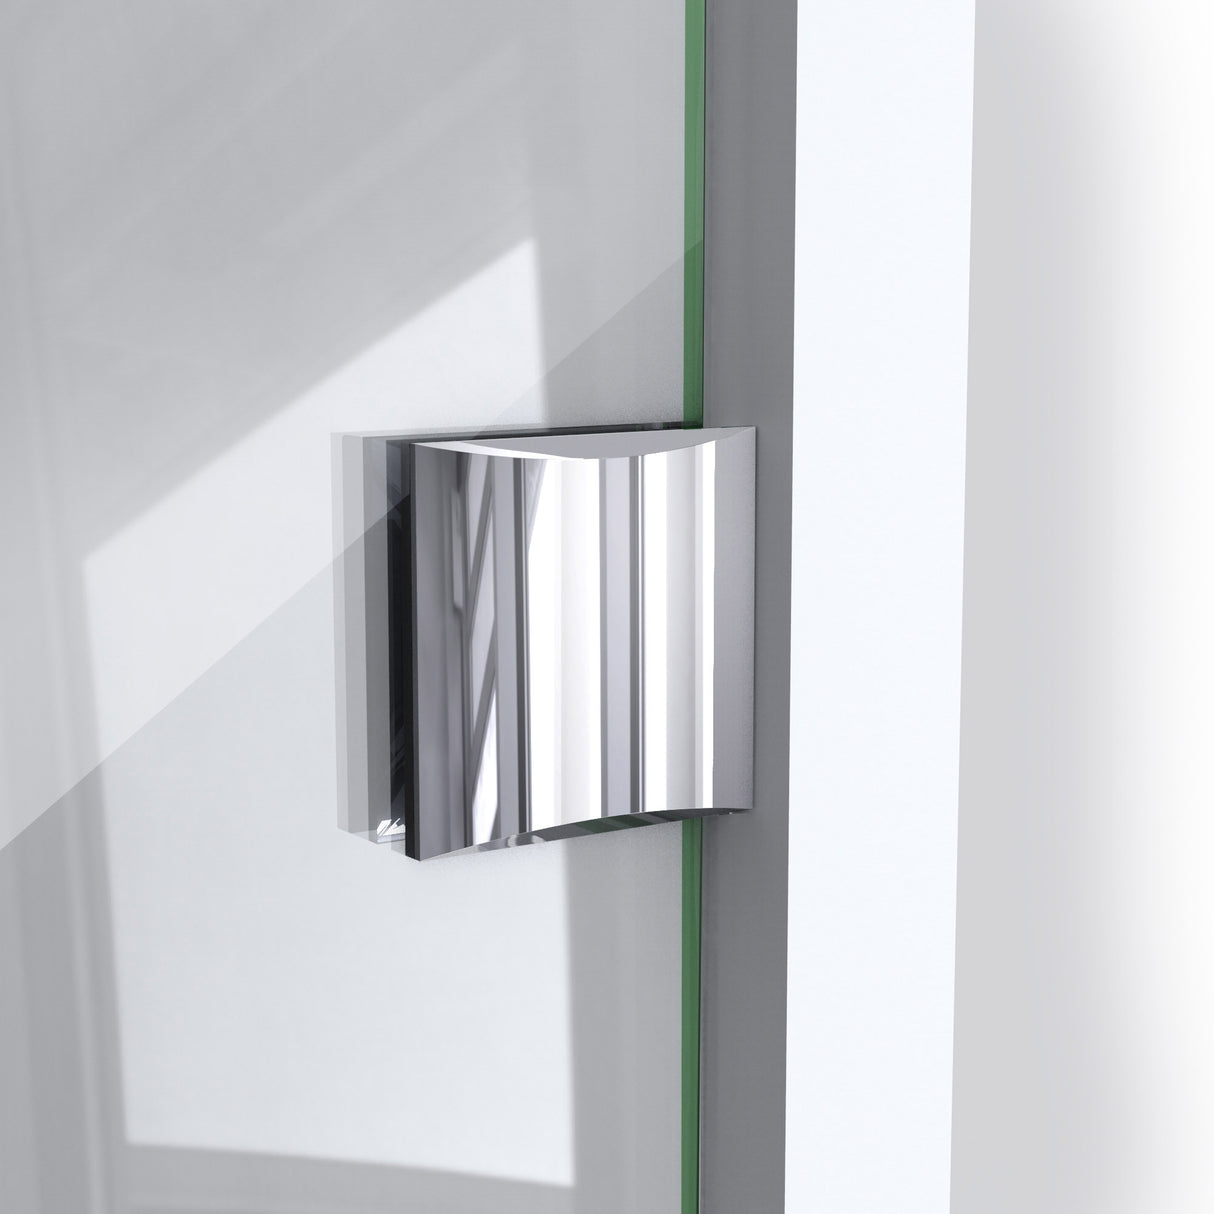 DreamLine Prism Lux 40 in. x 74 3/4 in. Fully Frameless Neo-Angle Shower Enclosure in Brushed Nickel with Biscuit Base